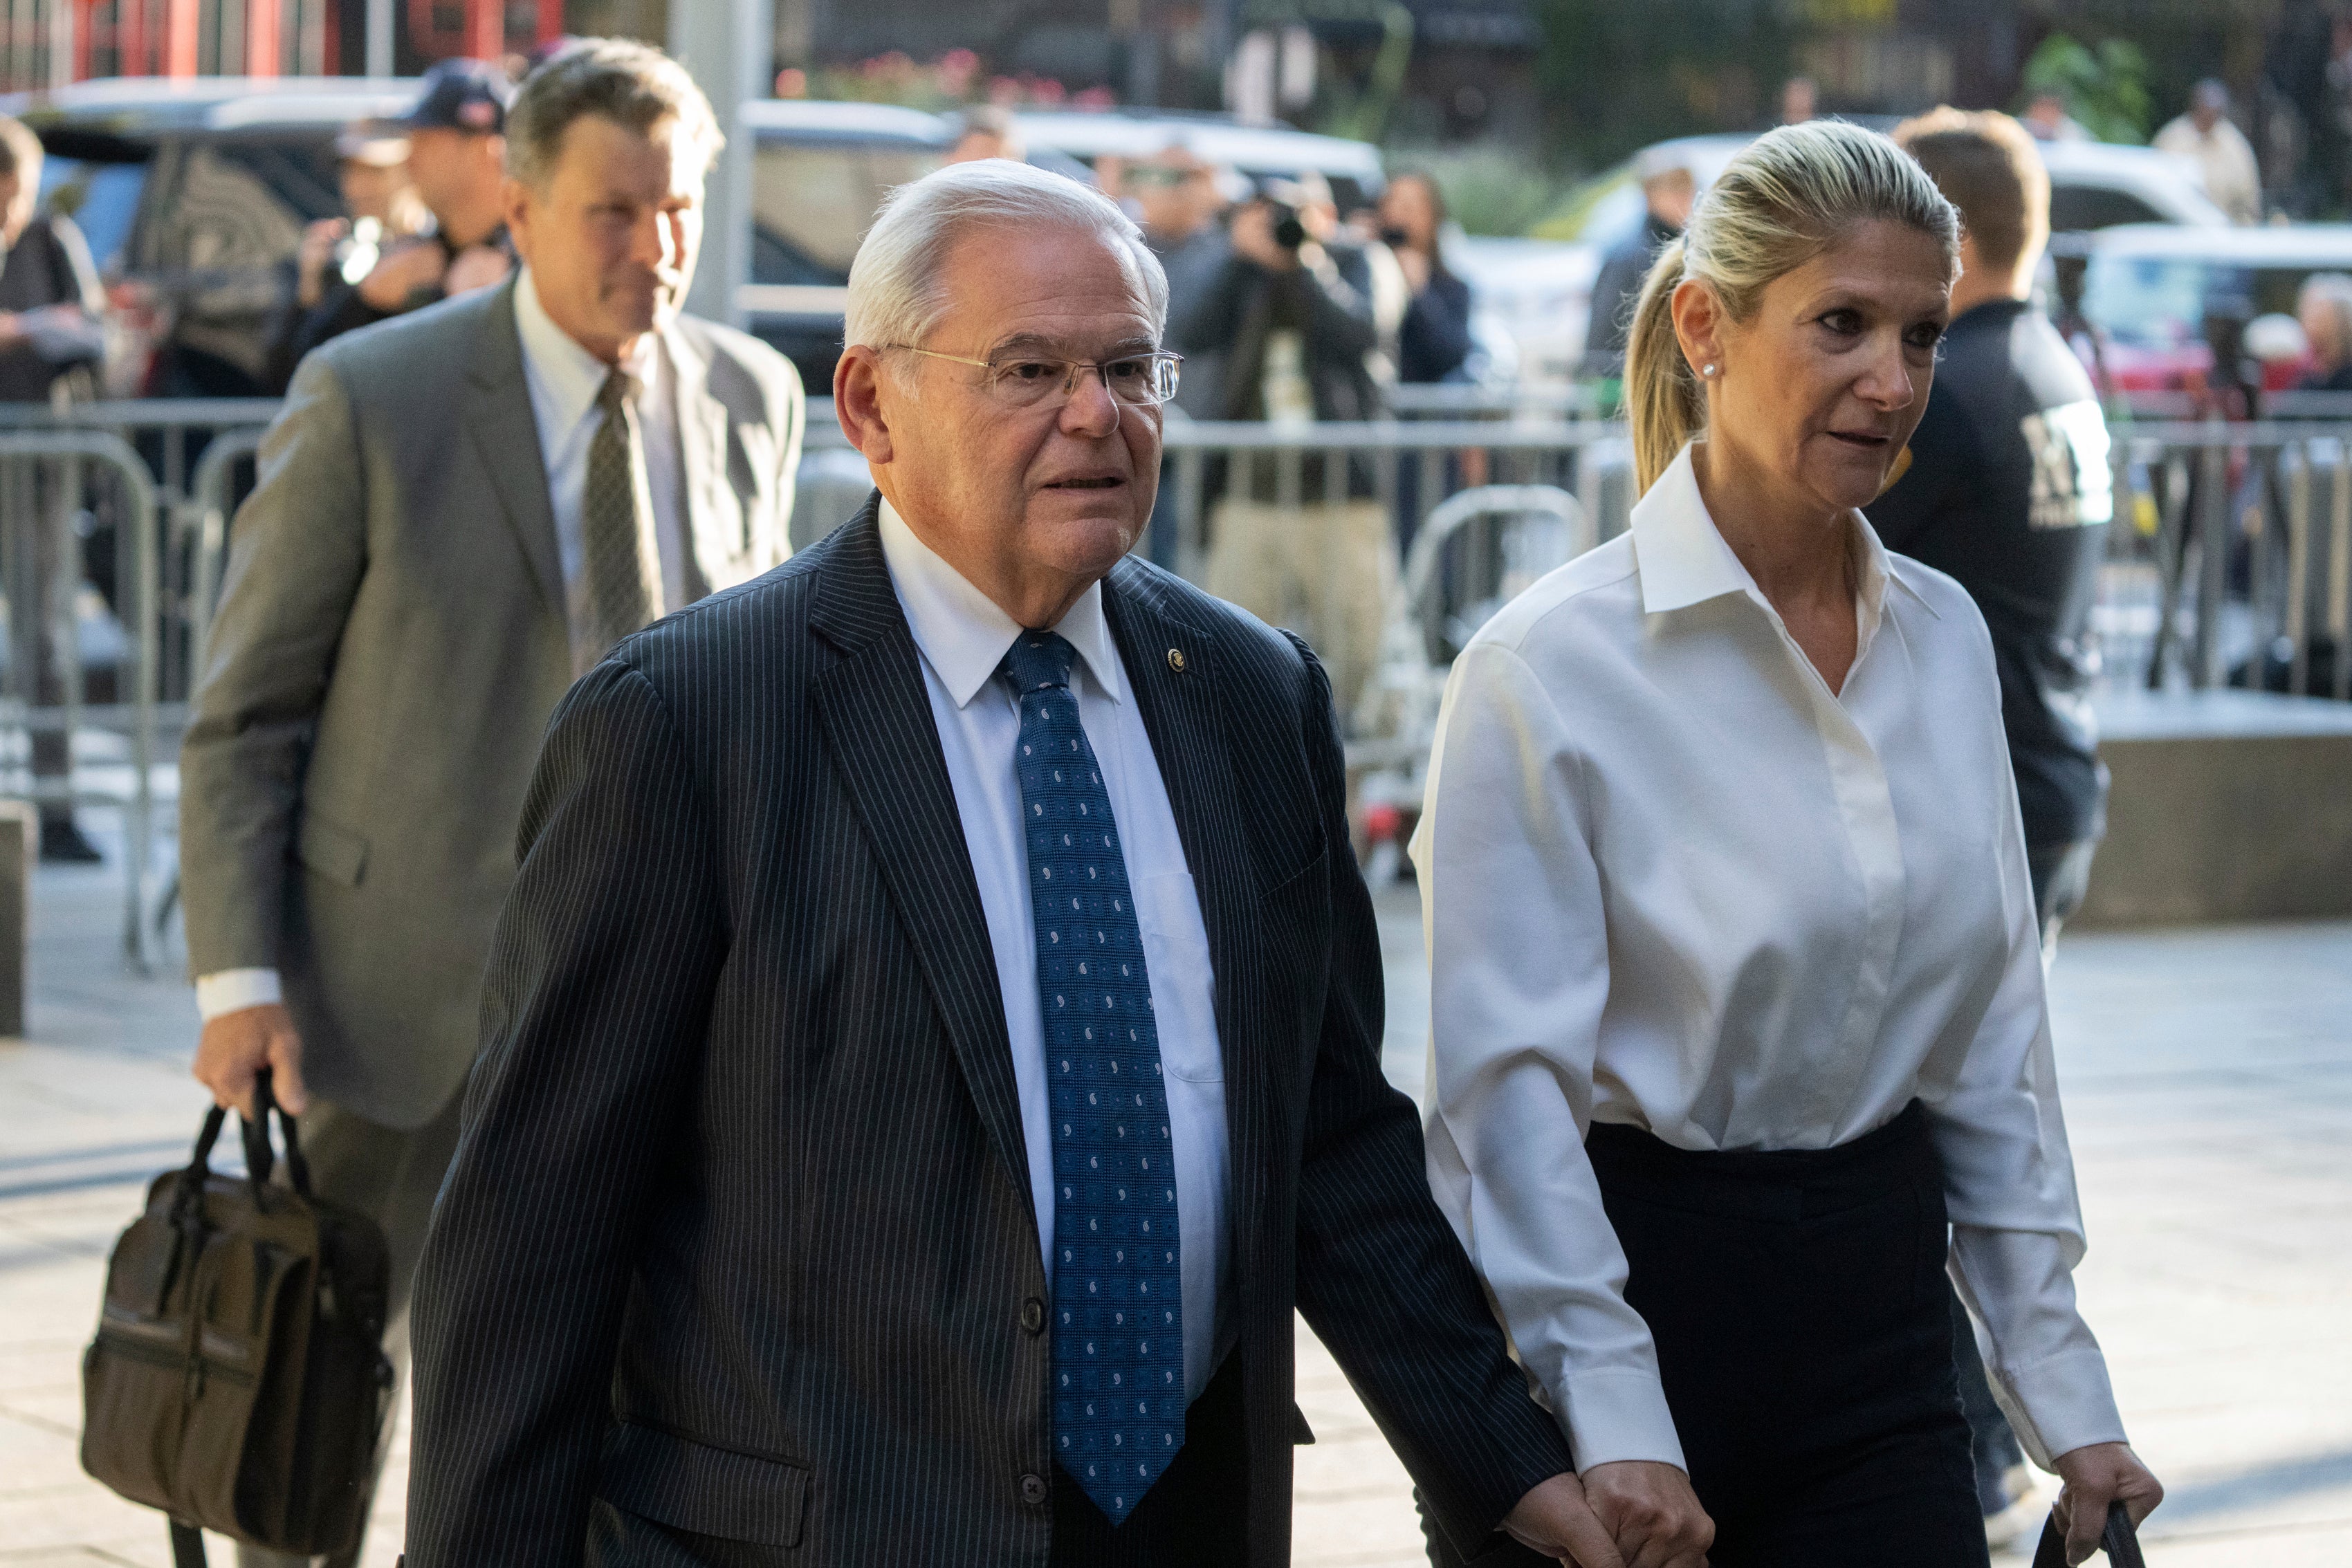 Senator Menendez and his wife, Nadine Menendez, arrive at the federal courthouse in New York on 27 September. He will be tried in May and she will be put on trial in July